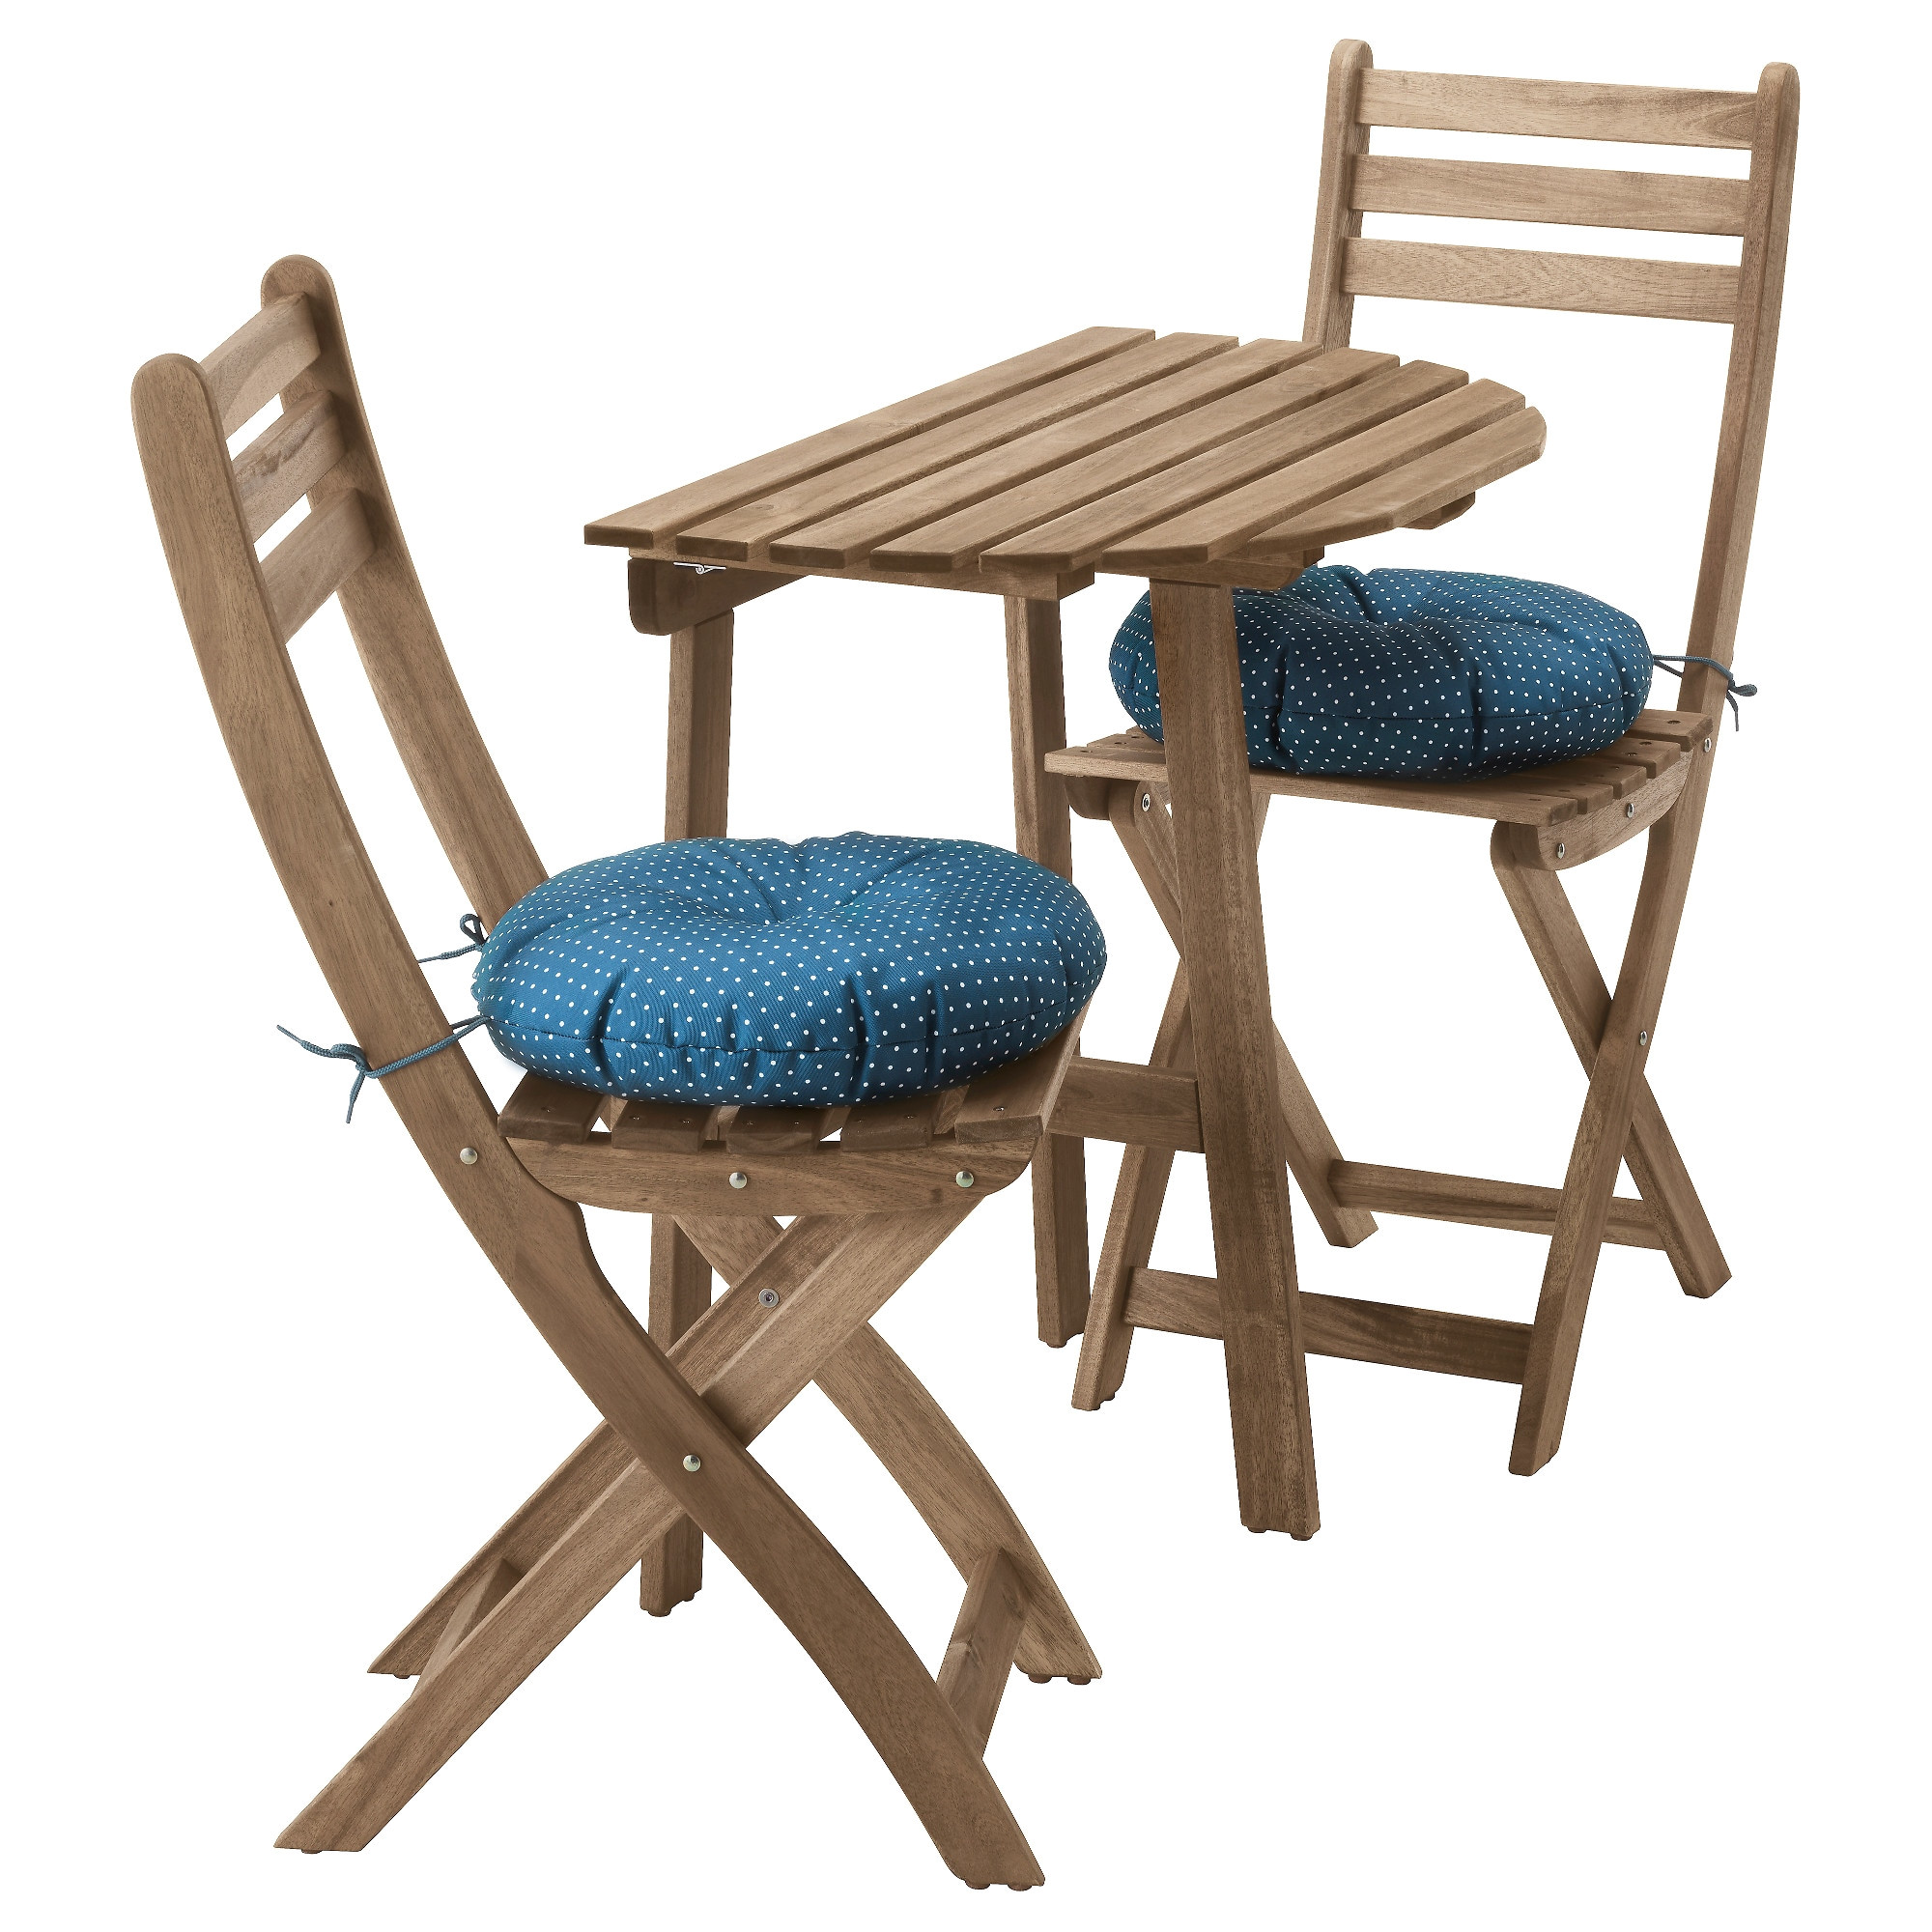 ikea askholmen table f wall 2 fold chairs outdoor